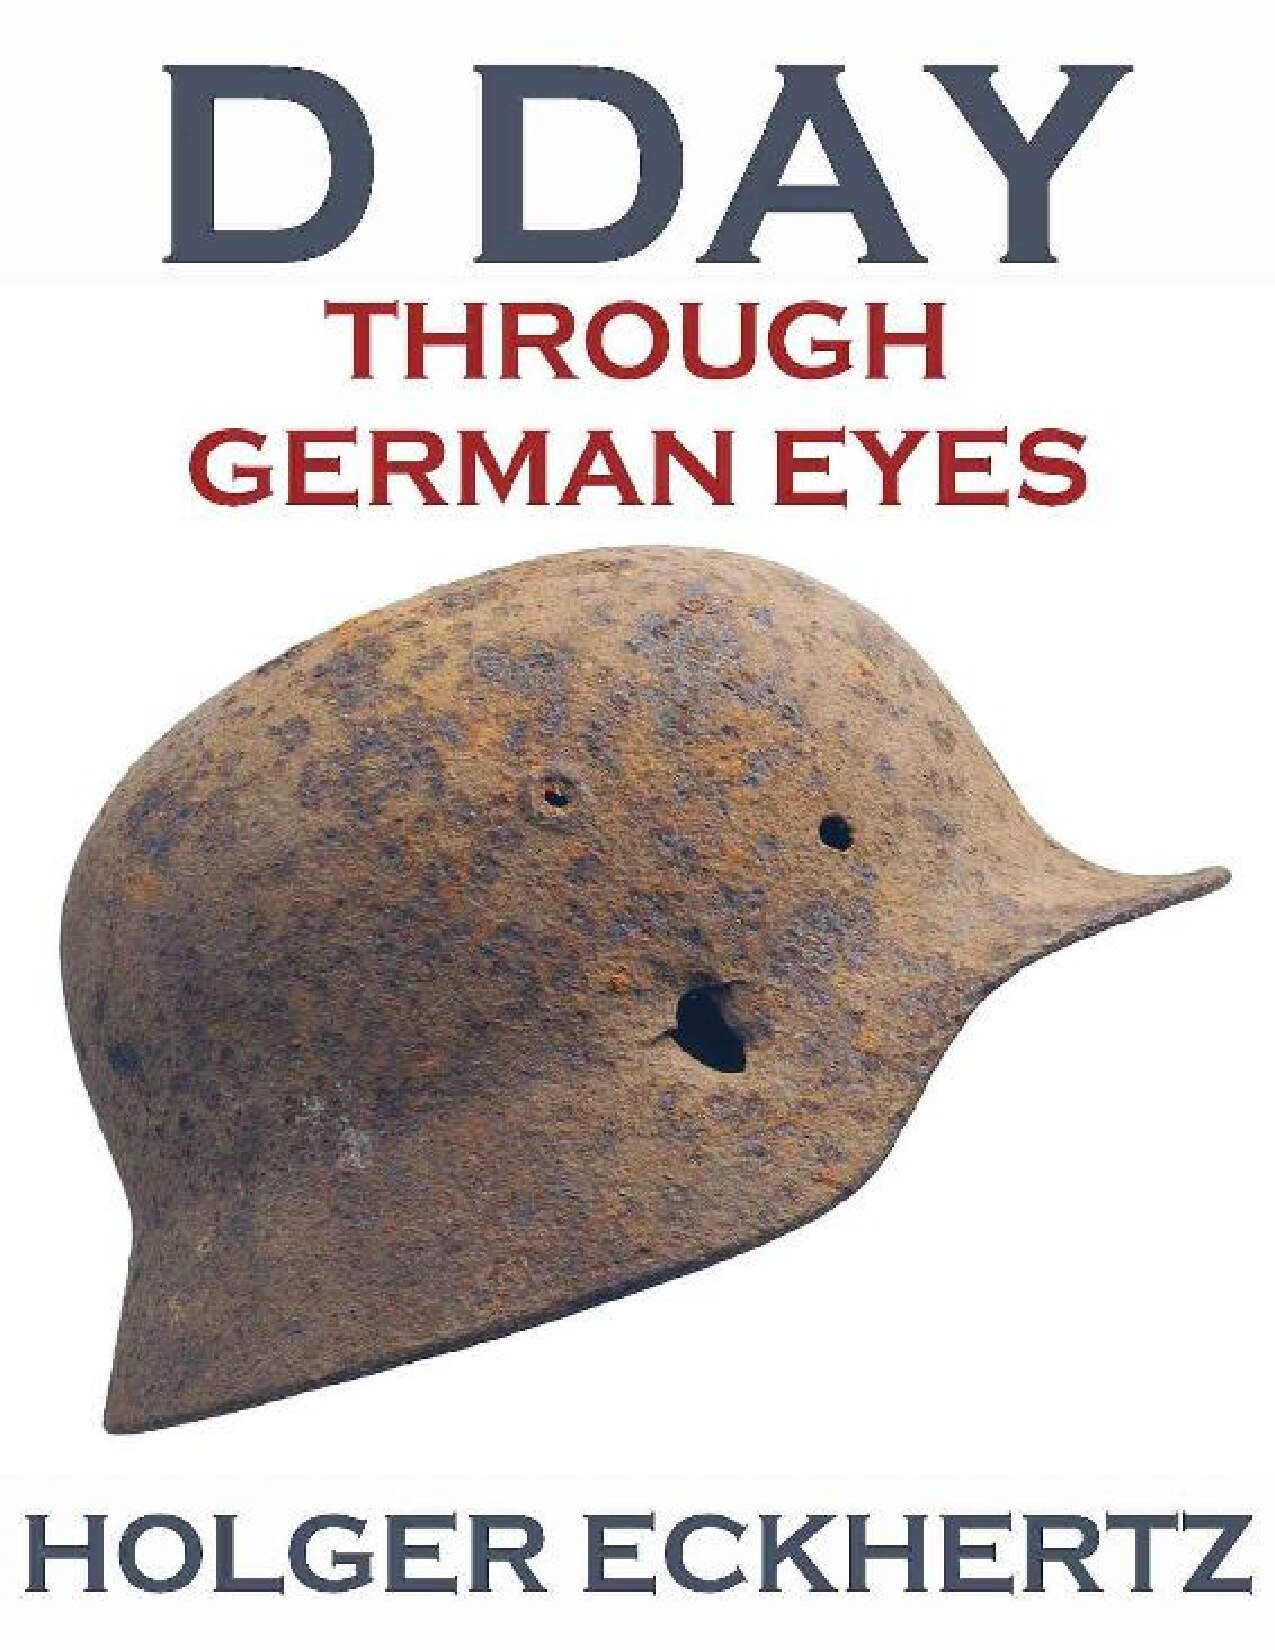 D DAY Through German Eyes - BOOK 1 - The Hidden Story of June 6th 1944